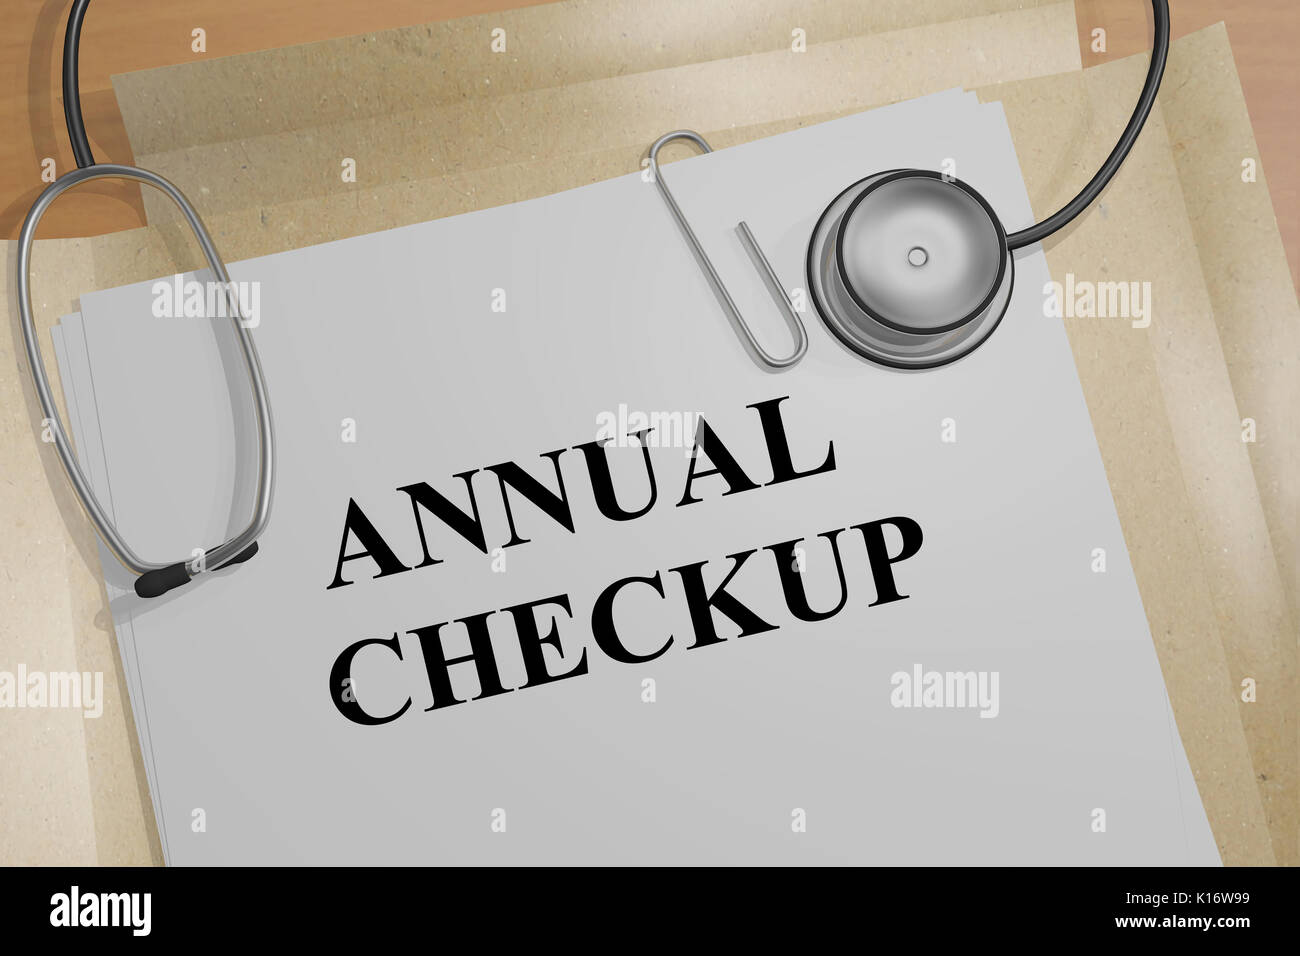 3D illustration of 'ANNUAL CHECKUP' title on a medical document Stock Photo